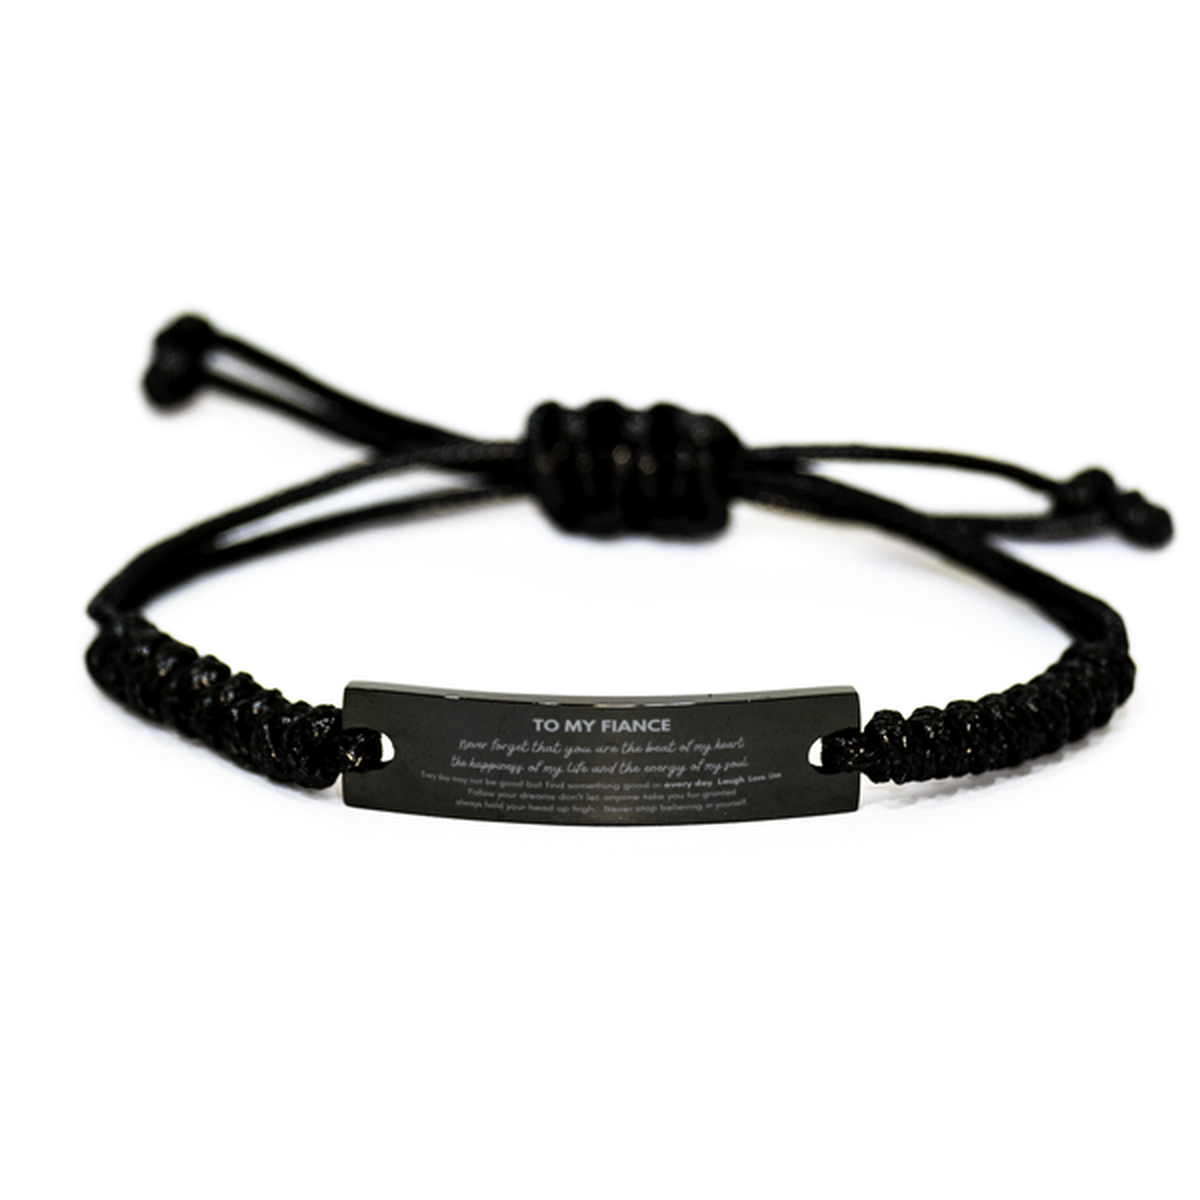 To My Fiance Bracelet Gifts, Christmas Fiance Black Rope Bracelet Present, Birthday Unique Motivational For Fiance, To My Fiance Never forget that you are the beat of my heart the happiness of my life and the energy of my soul